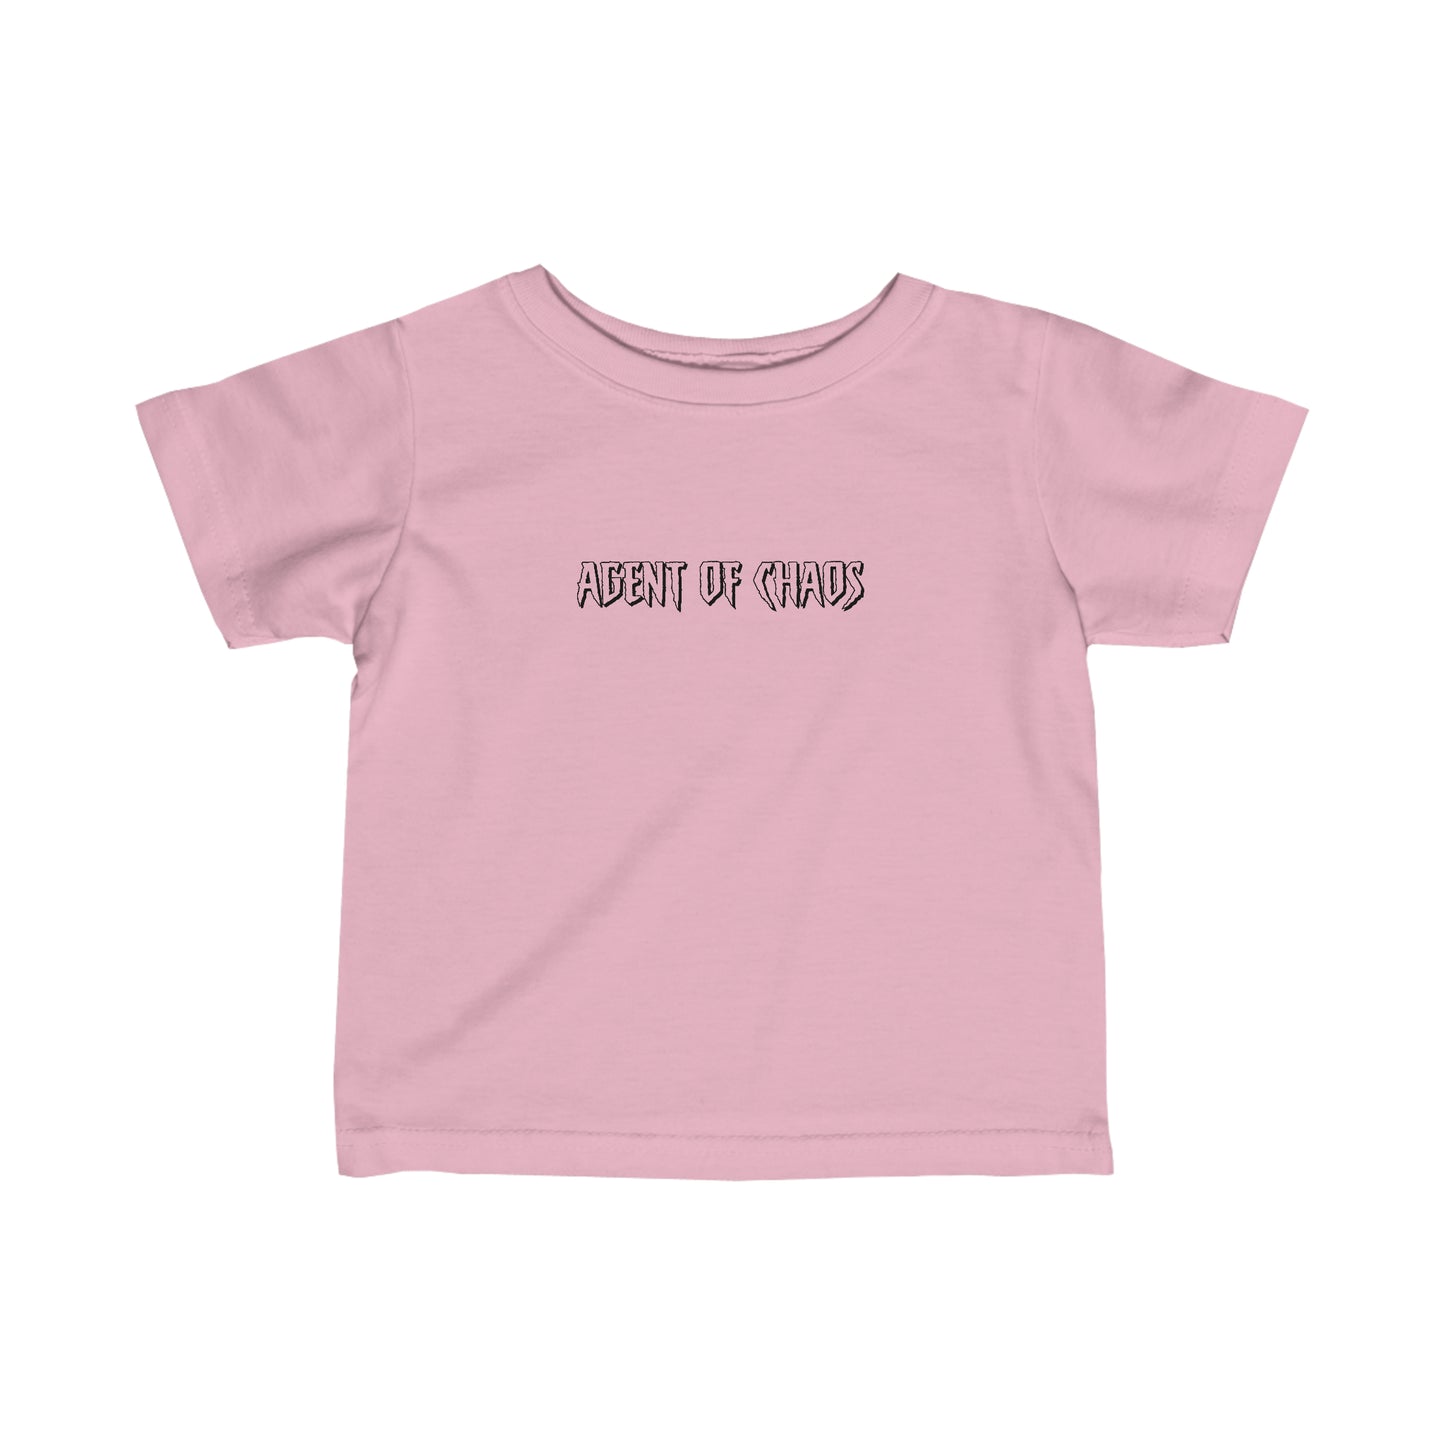 Agent of Chaos - Infant Fine Jersey Tee